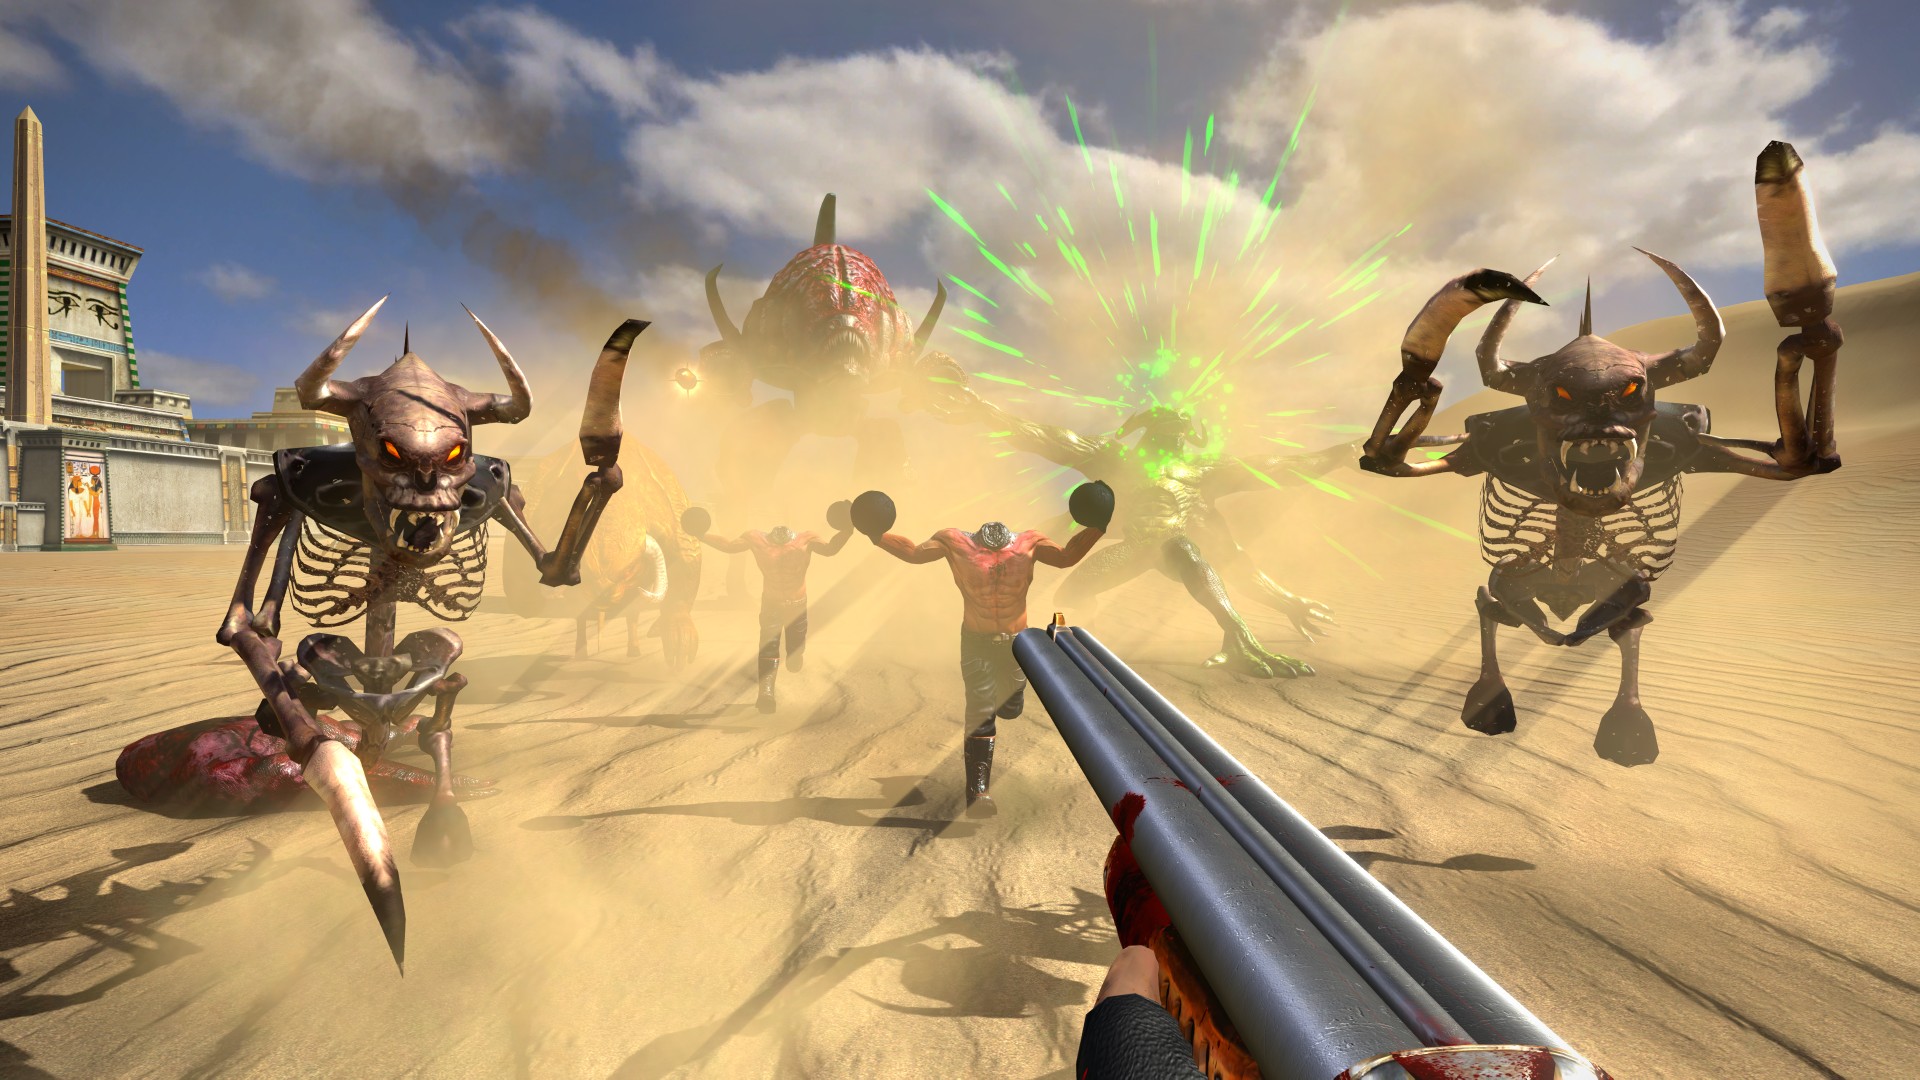 serious sam backwards compatible xbox one